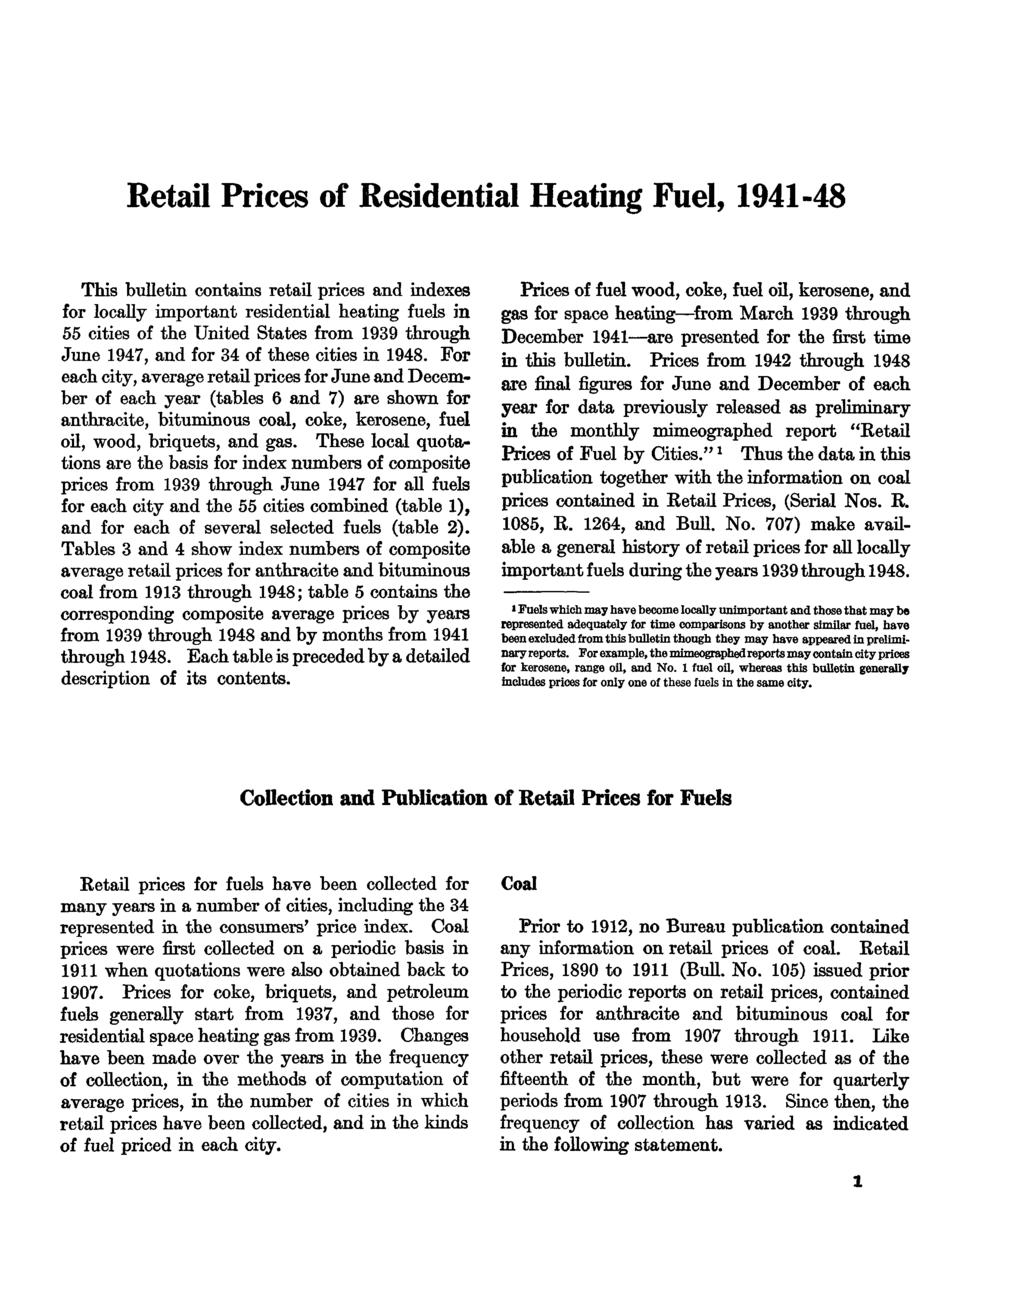 Retail Prices of Residential Heating Fuel, 1941-48 This bulletin contains retail prices and indexes for locally important residential heating fuels in 55 cities of the United States from 1939 through